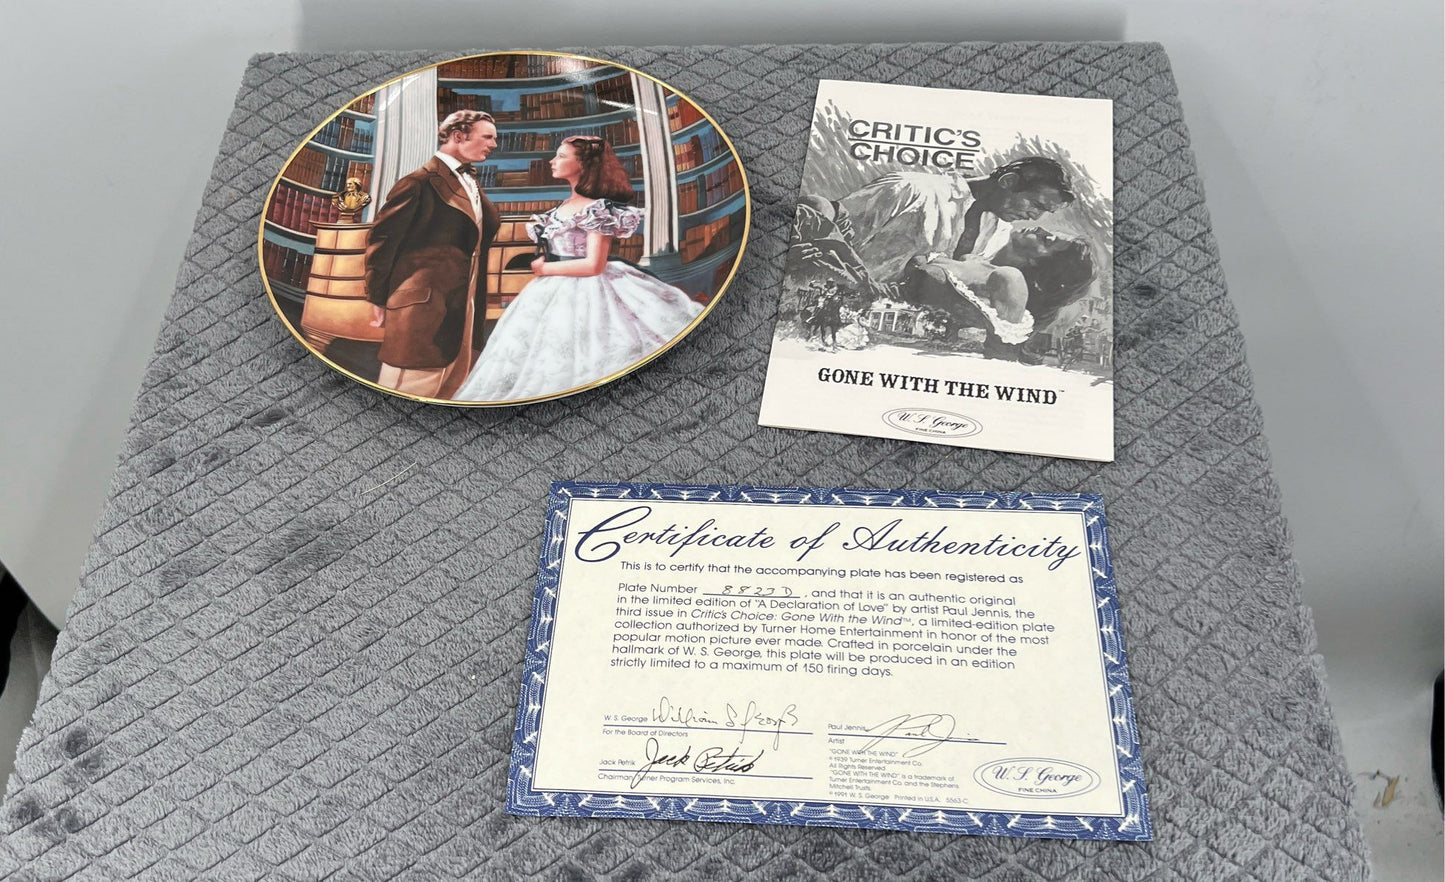 Gone With The Wind Critic's Choice Collectors Plates-Lot Of 3-Paul Jennis-1991